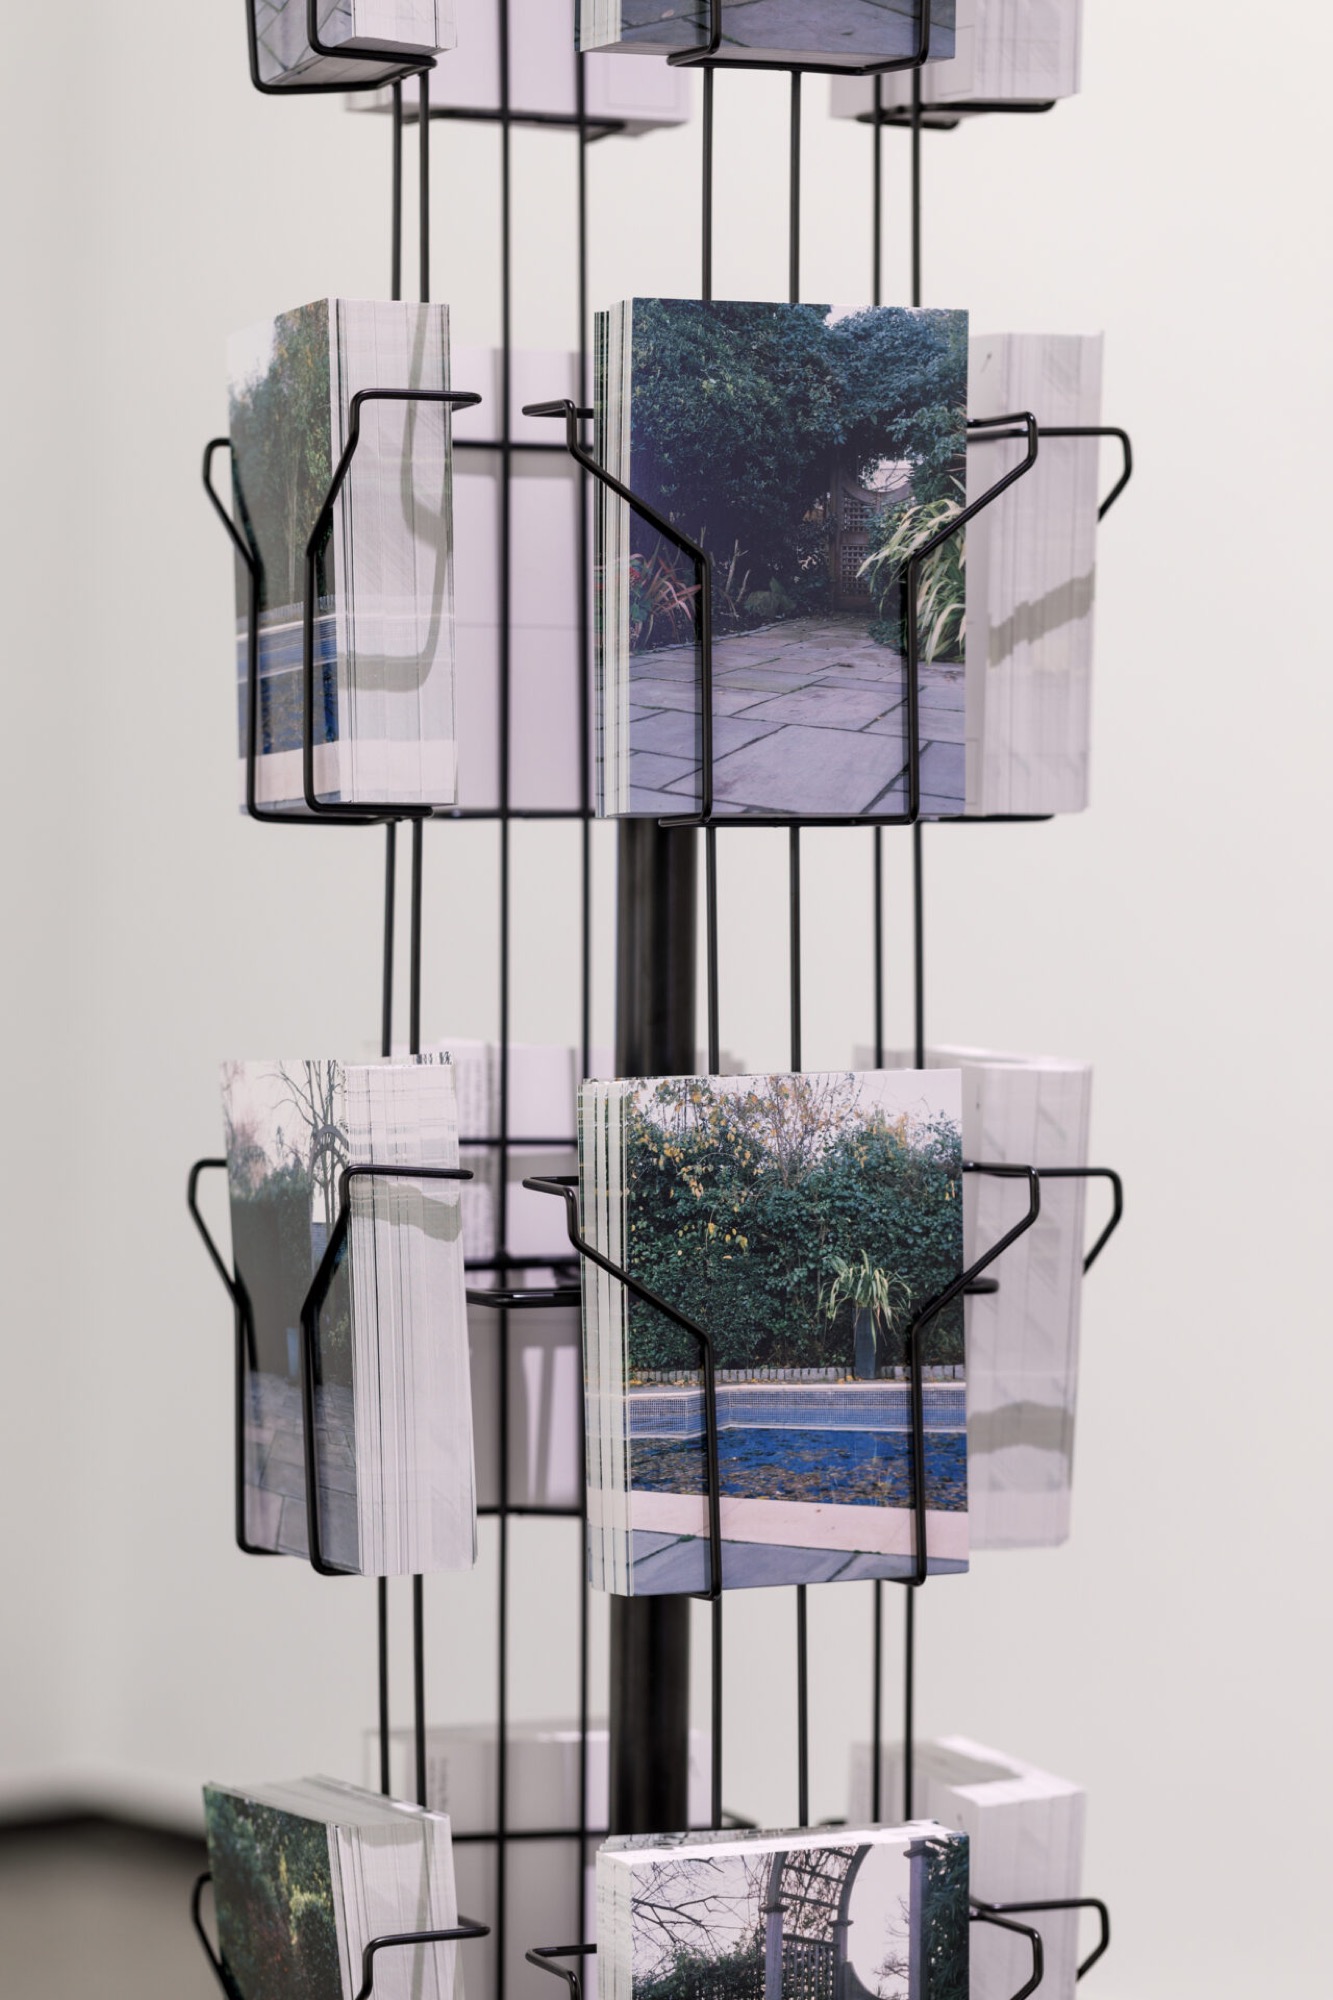 Becky Beasley, P.A.N.O.R.A.M.A. 2010. Photographic postcards and revolving postcard stand, 10.5 x 14.8 cm (each). Courtesy the artist. Photograph: Andrew Curtis.